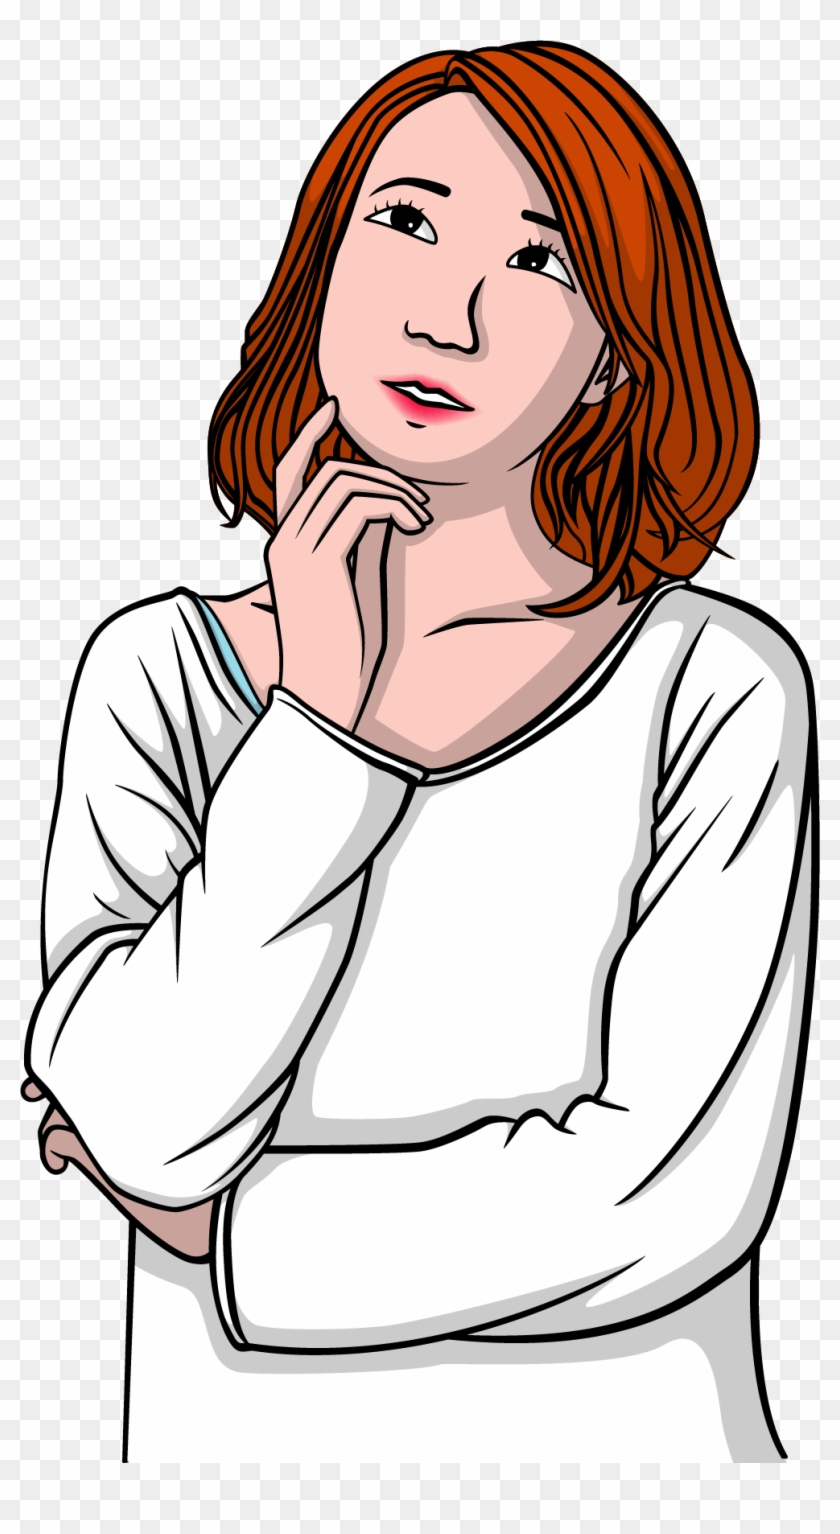 Woman Thought Girl Clip Art - Lady Thinking Clip Art - Png Download